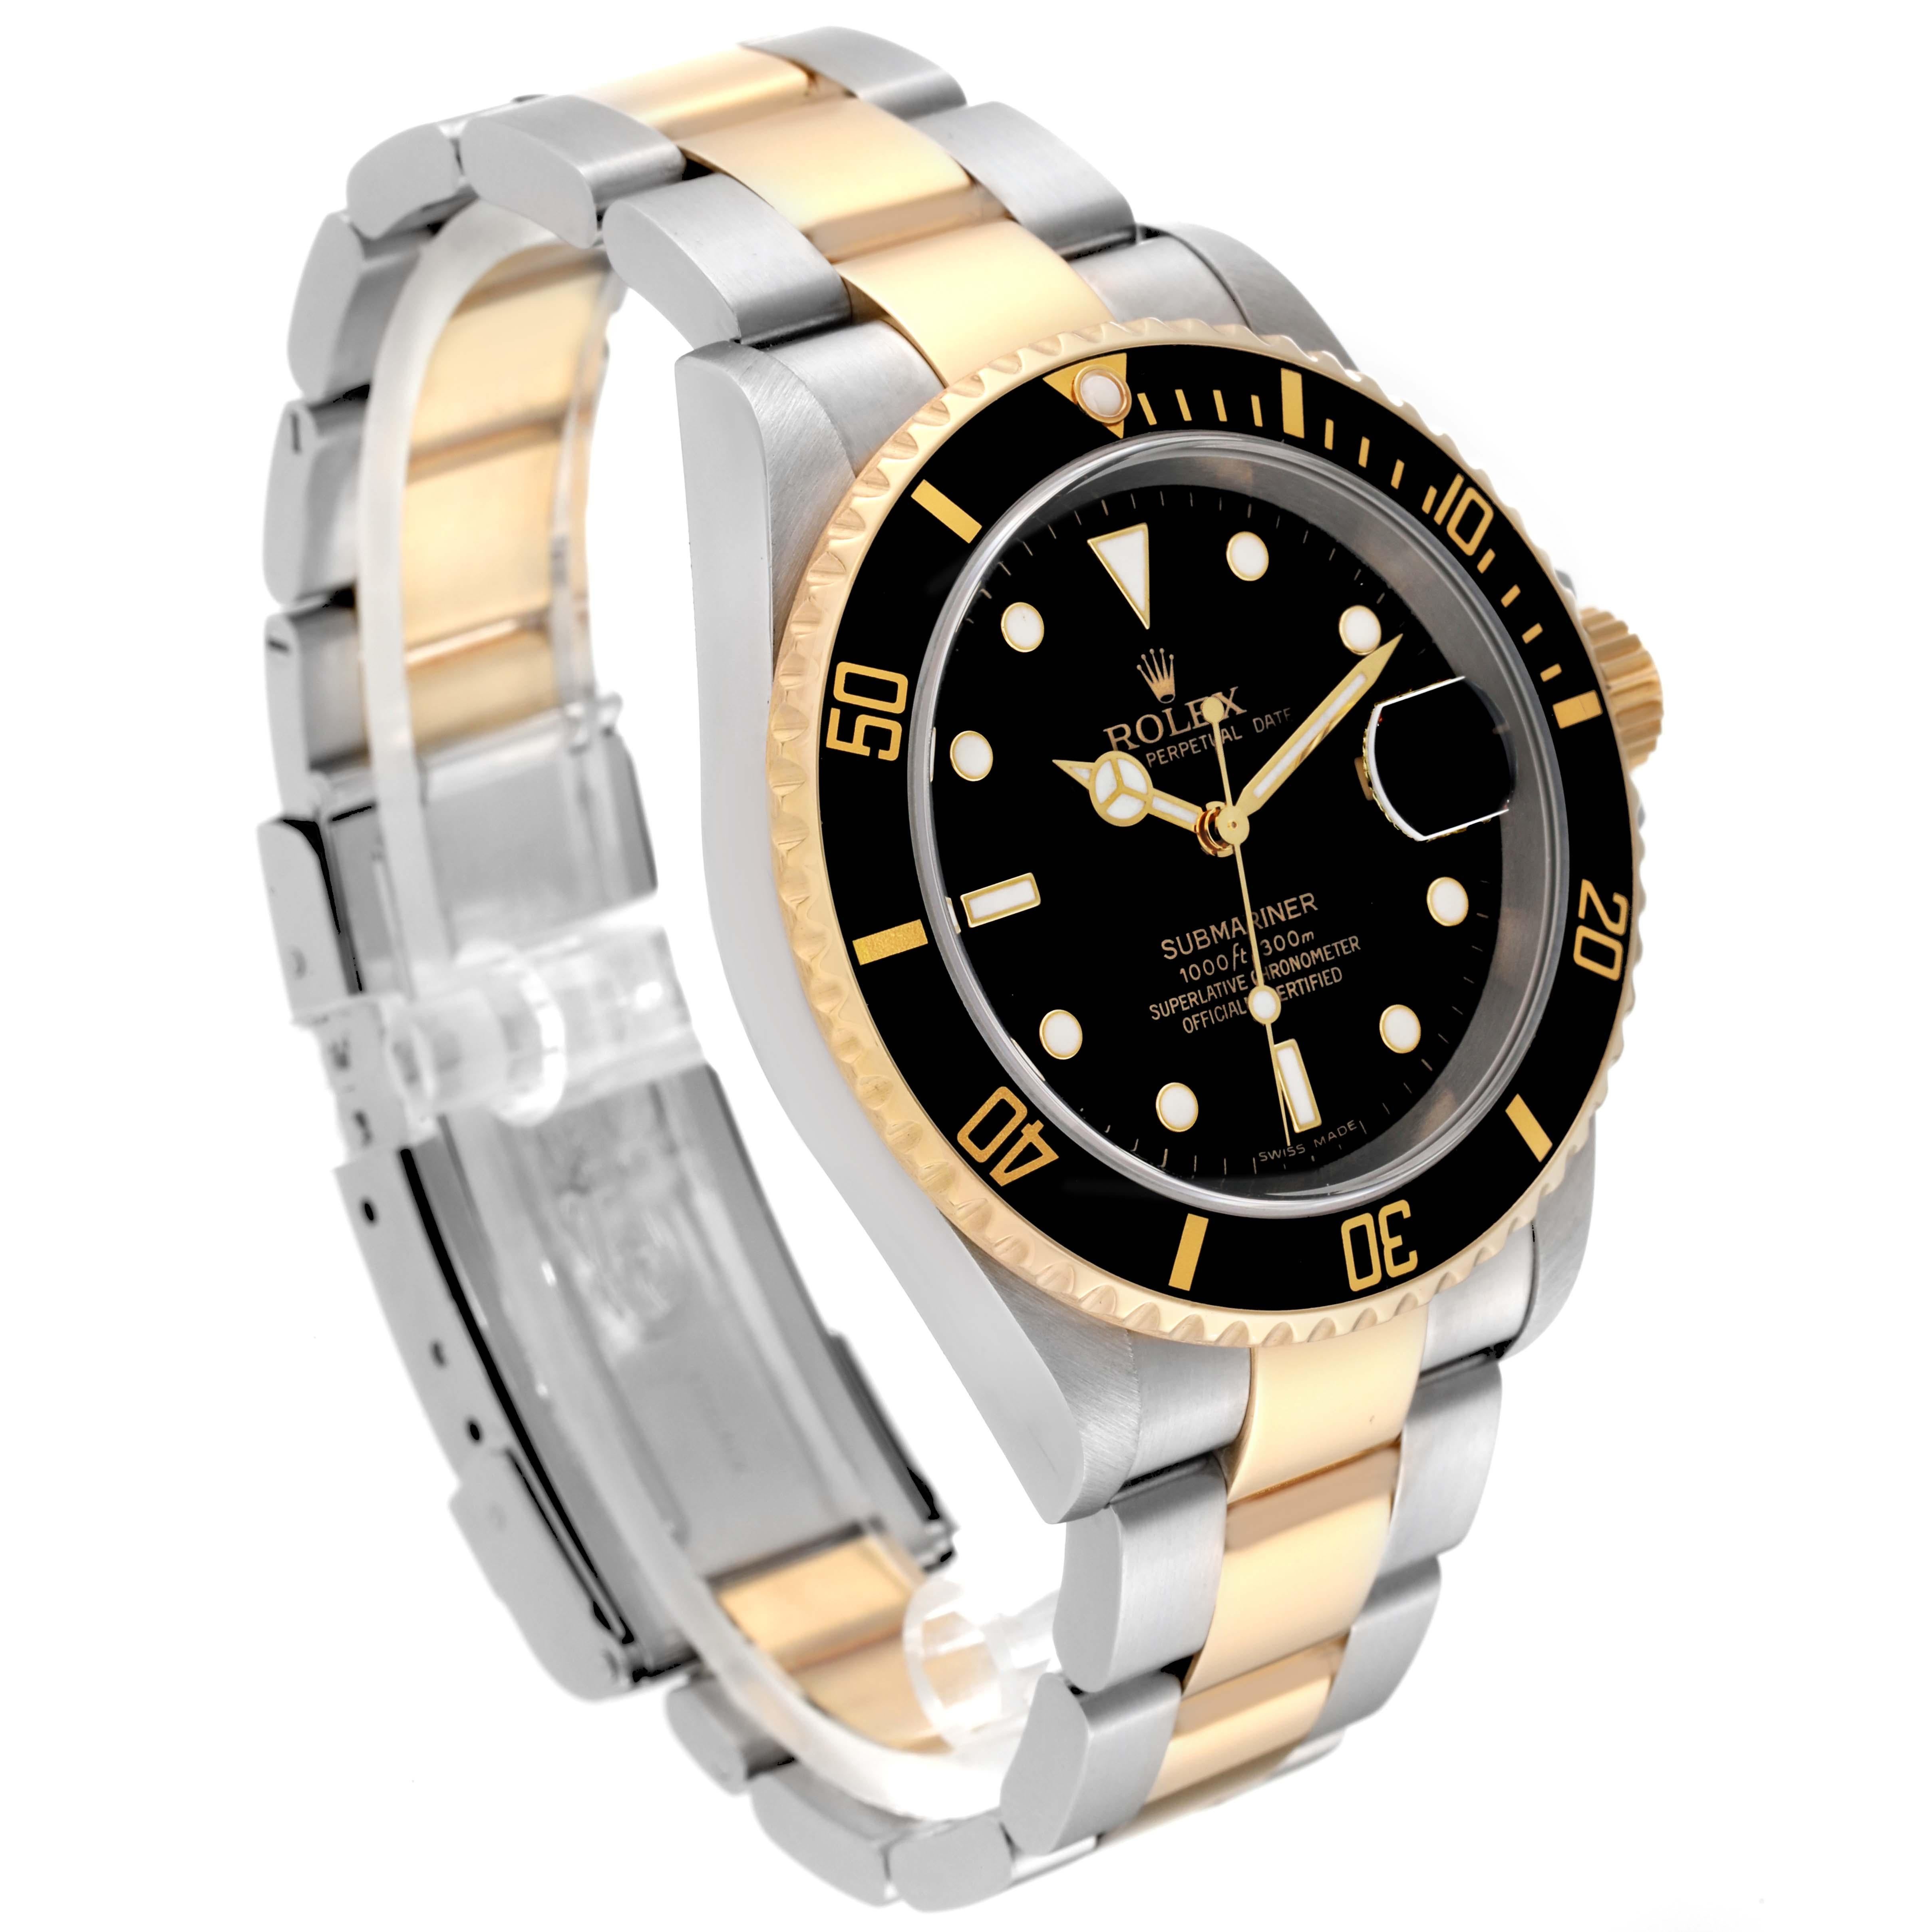 Rolex Submariner Steel Yellow Gold Black Dial Mens Watch 16613 Box Papers 2